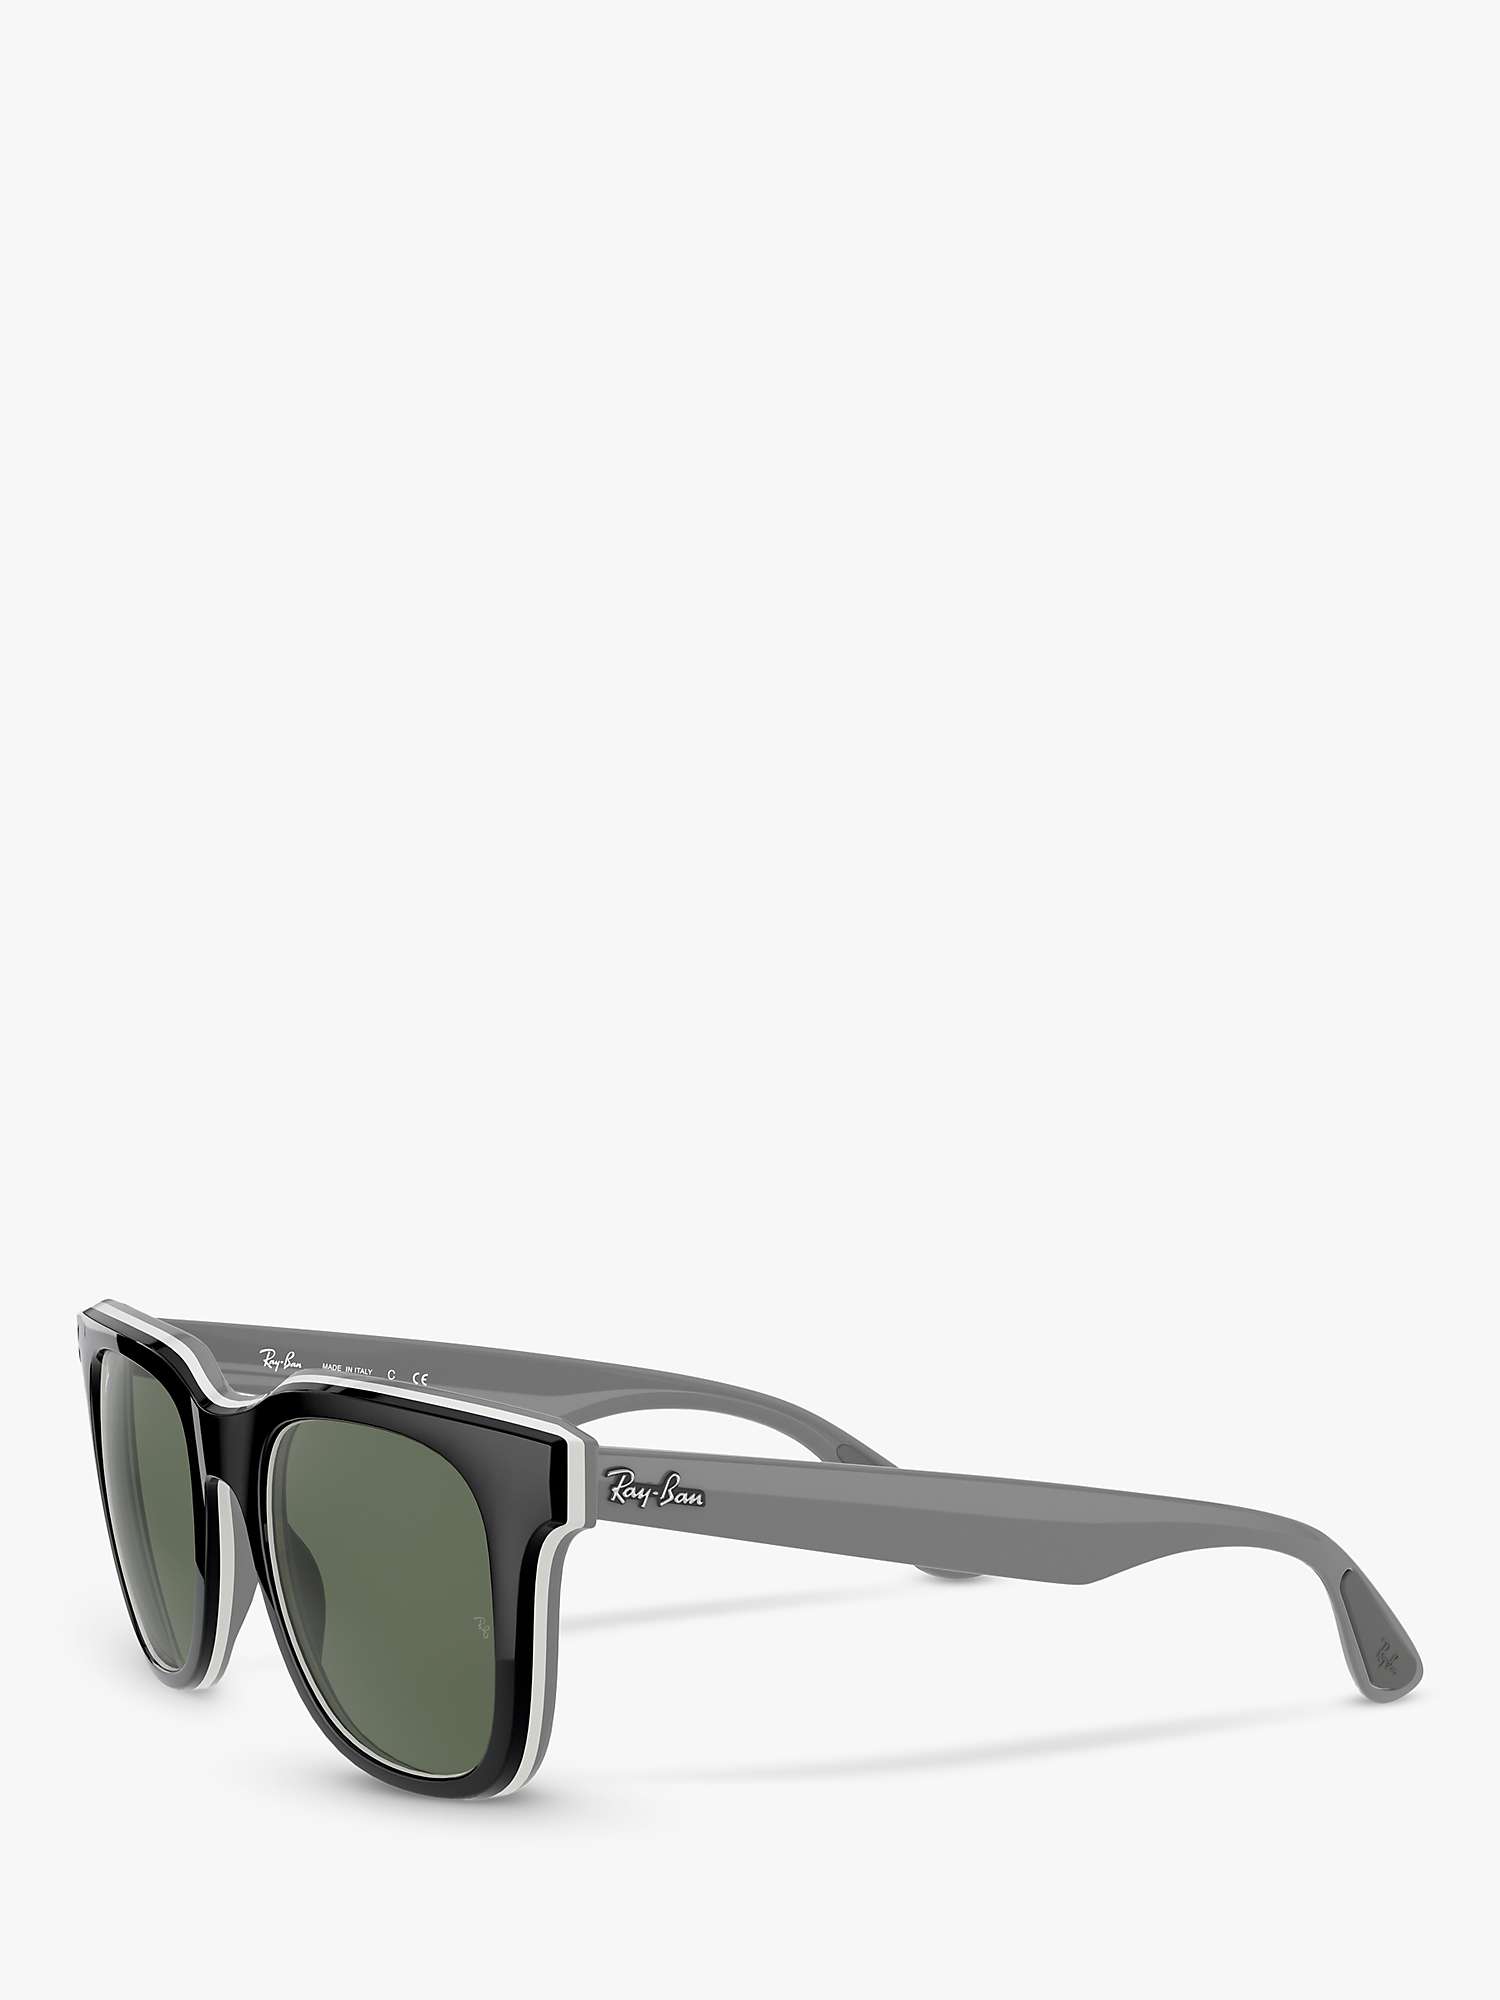 Buy Ray-Ban RB4368 Unisex Square Sunglasses Online at johnlewis.com